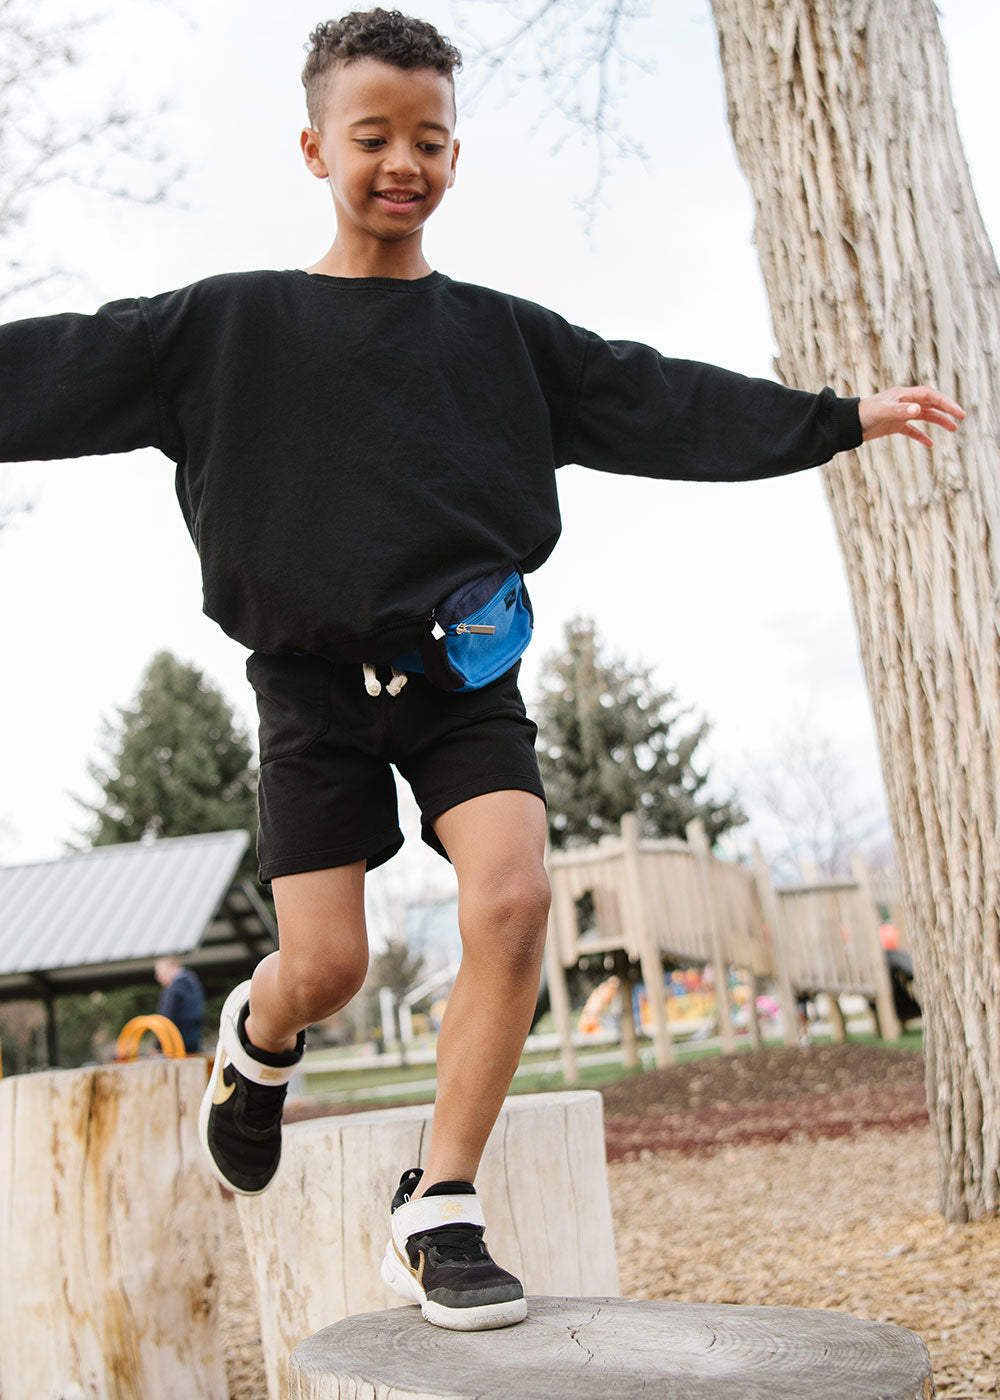 Young boy playing in a park in Everyway activewear. Featuring fanny pack in blue